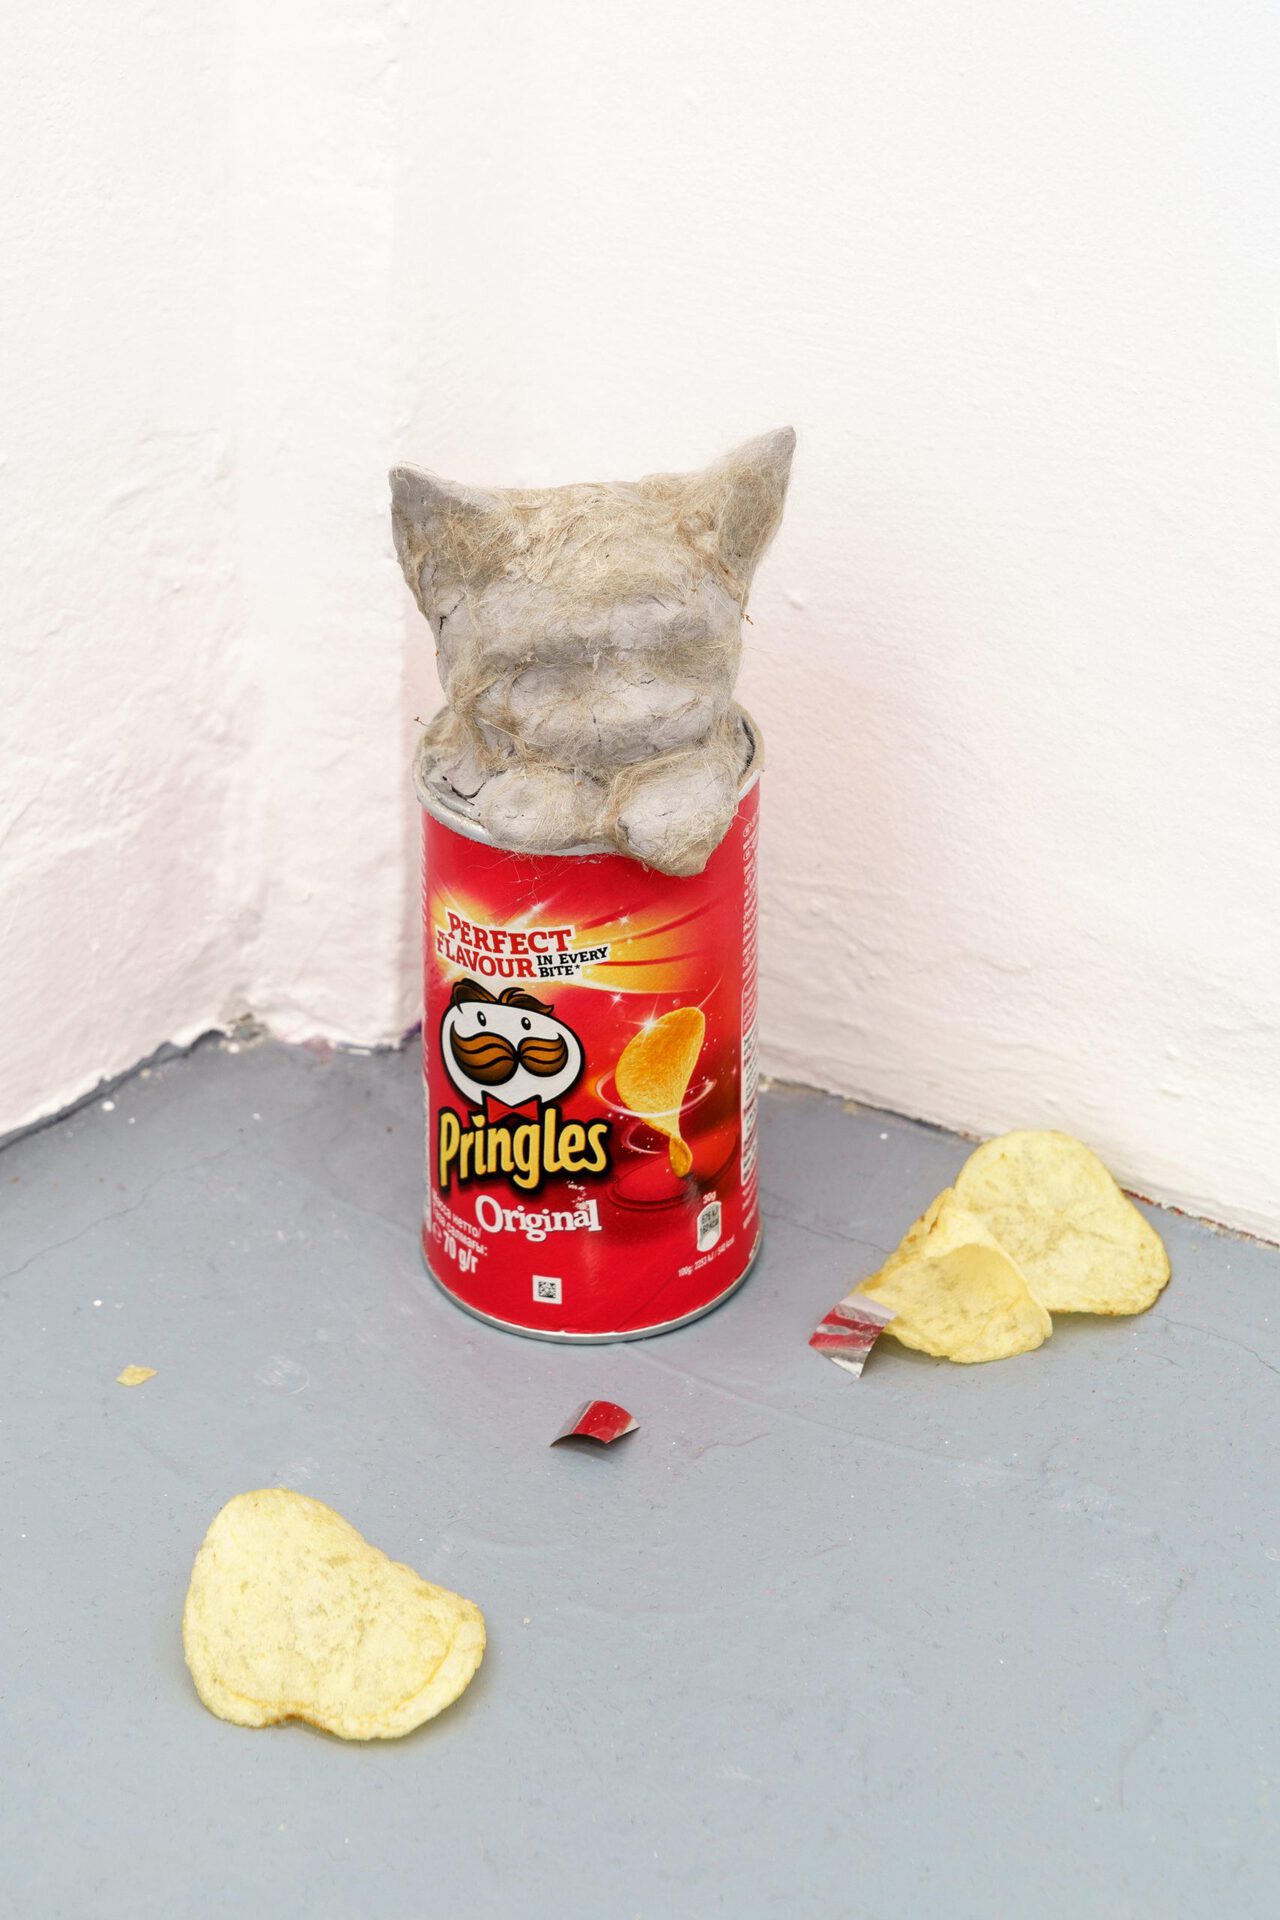 Vanya Venmer, ‘All Are Mingles’, 2021, clay, glue, wool of a cat Marcel, tobacco, can of Pringles,  potato chips, 9x8,5x19,5 cm